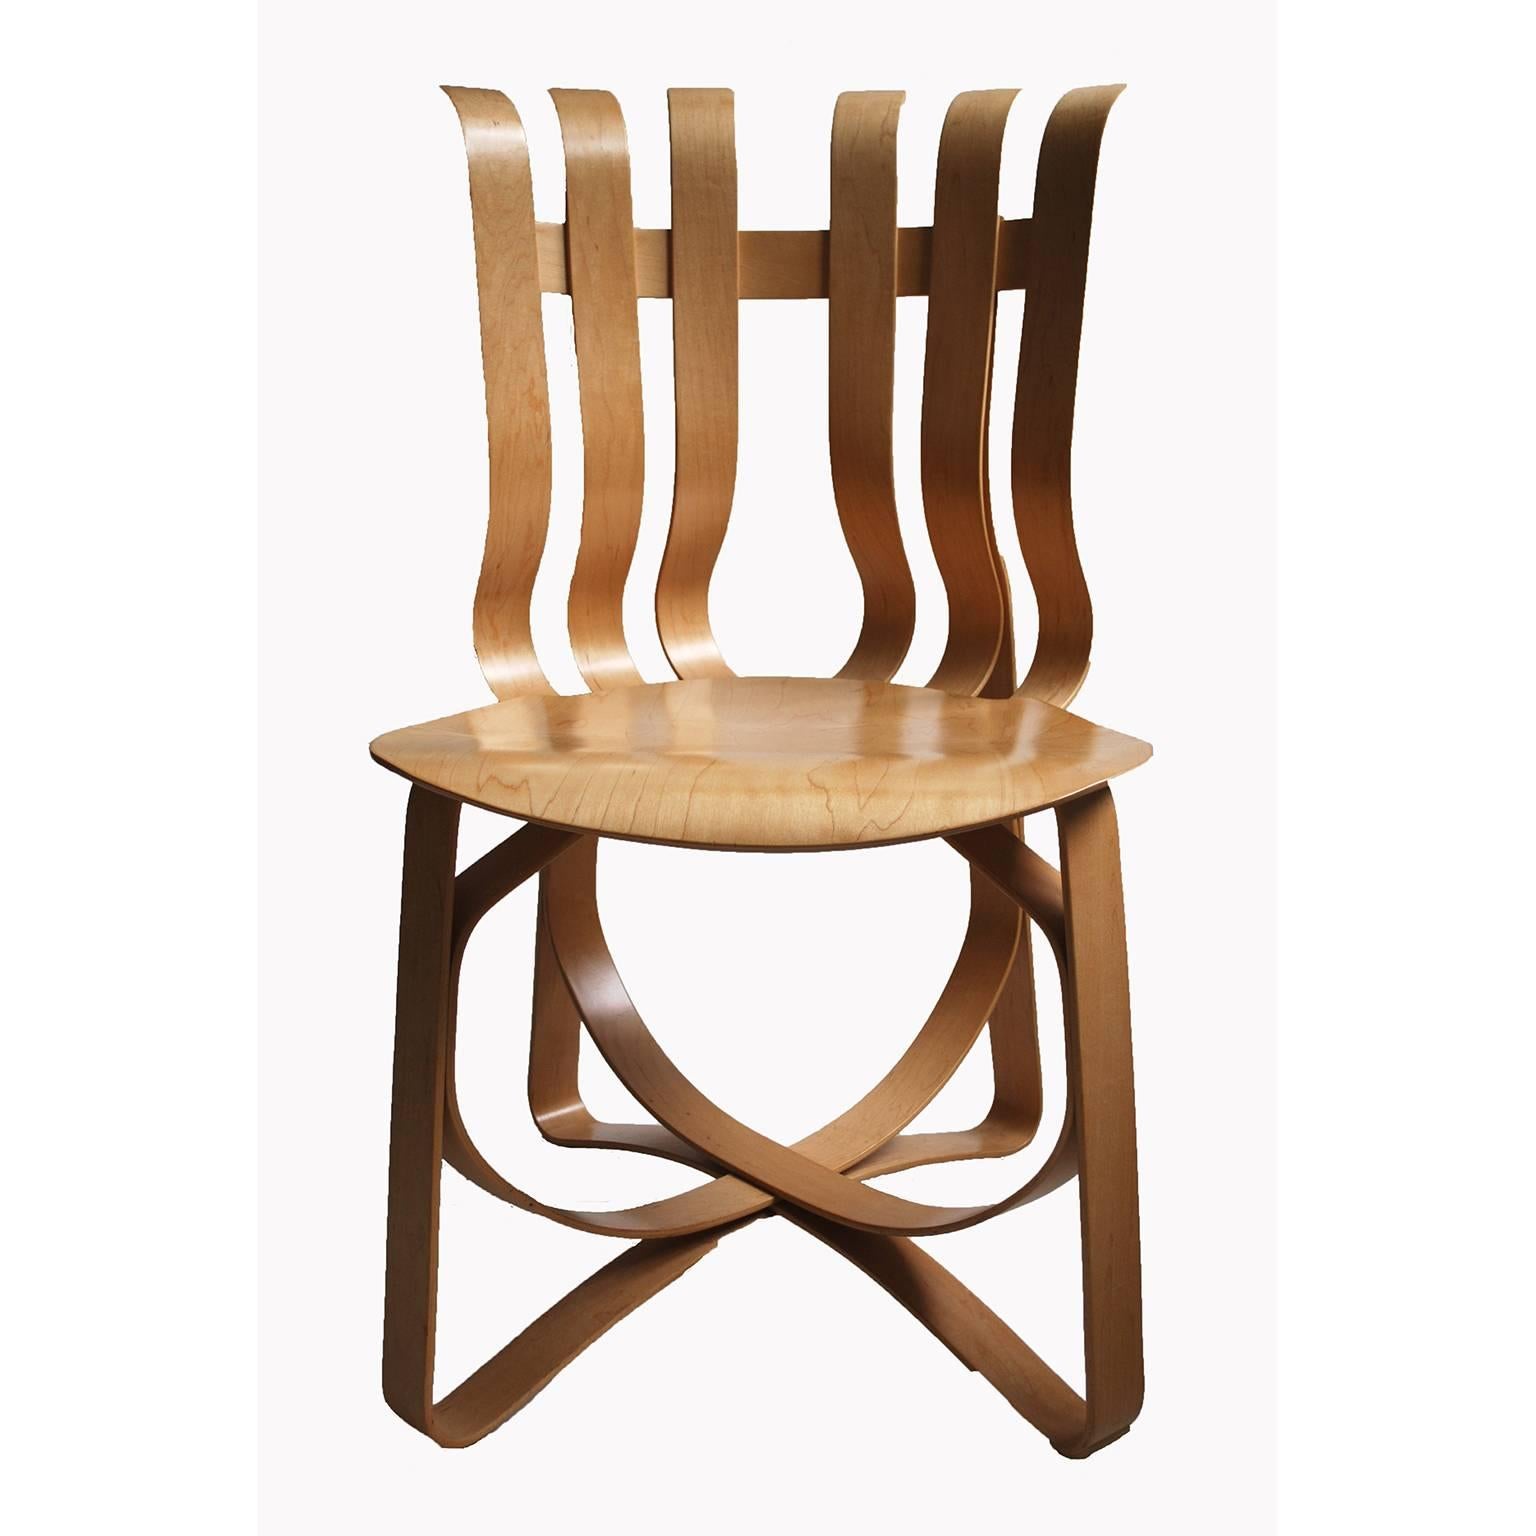 This chair design comes from world renowned architect Frank Gehry, FAIA. Constructed of laminated white maple veneer strips that flex for comfort. The underside of each chair is embossed with the date of production, Knoll Studio logo and Frank